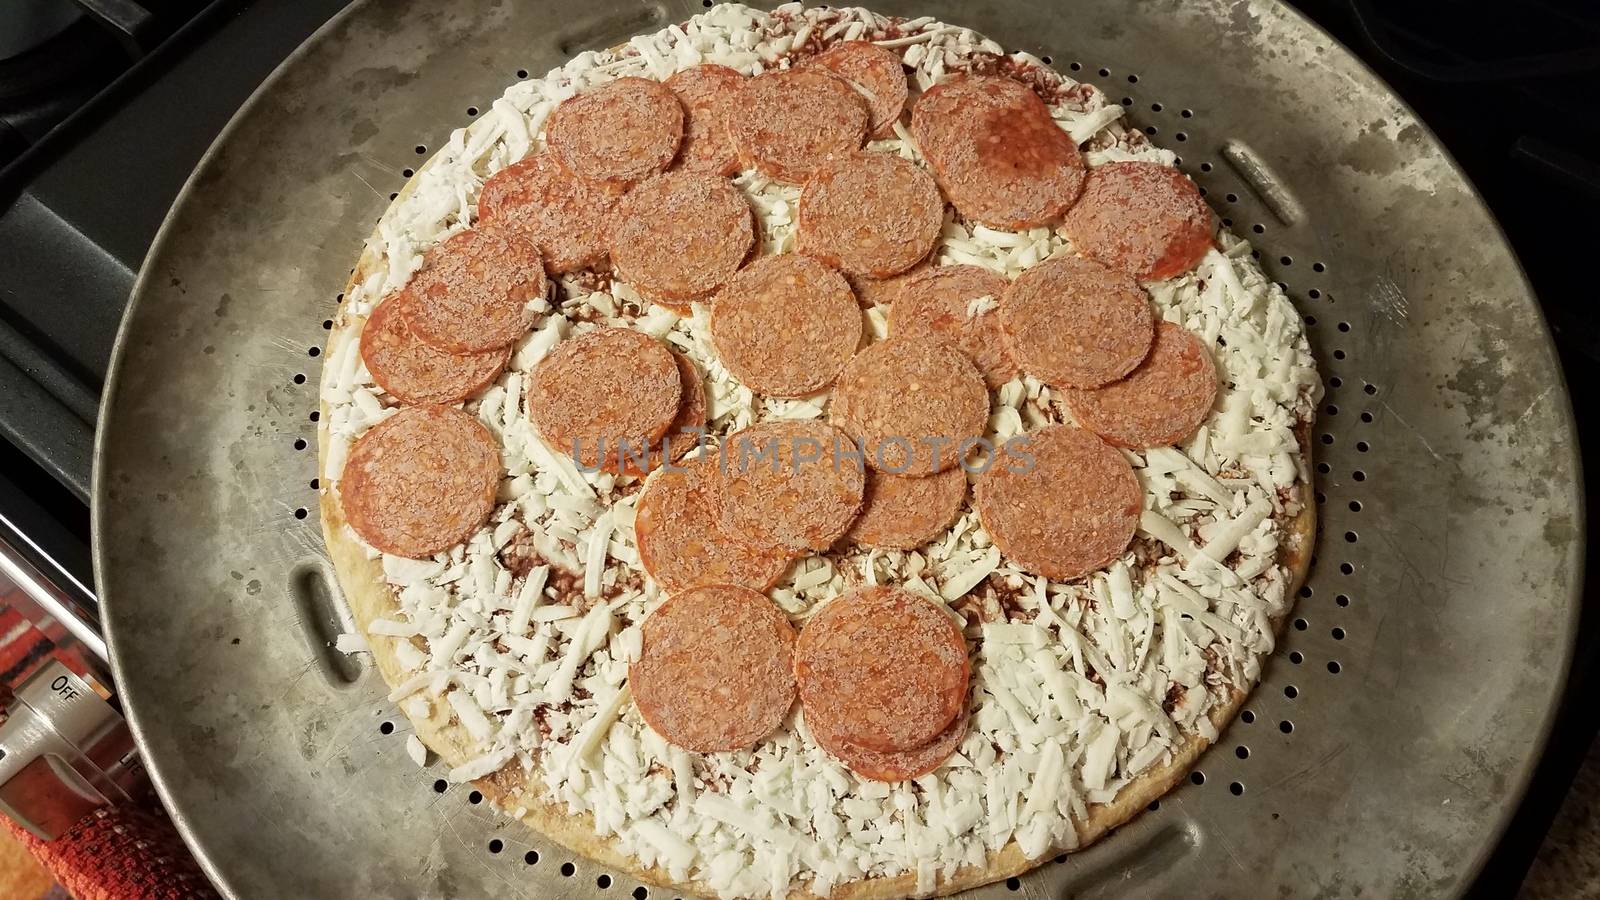 frozen pepperoni meat slices on pizza on metal baking tray